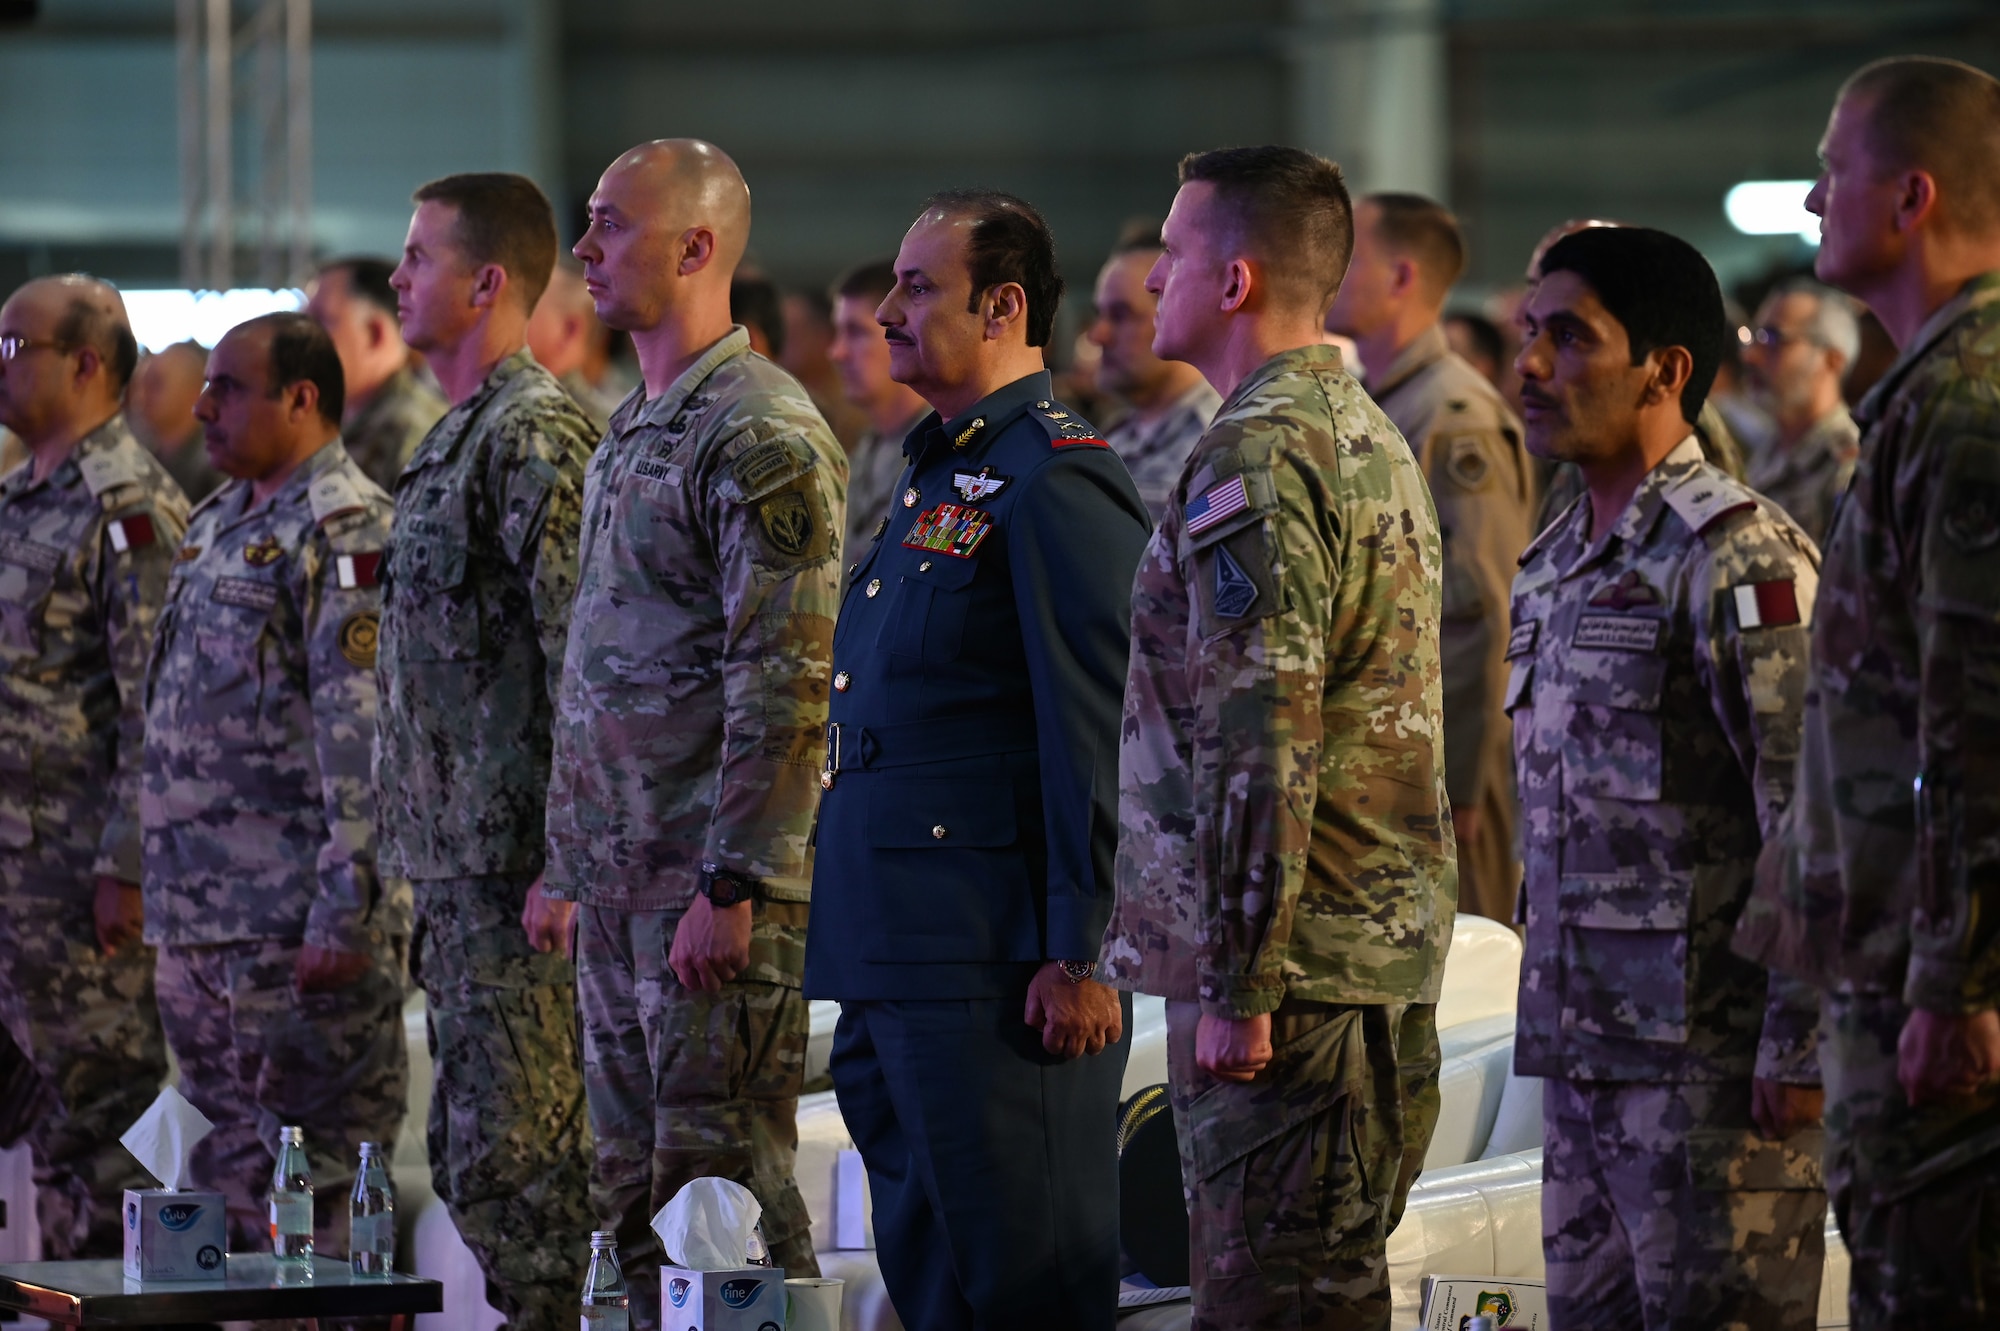 U.S. and coalition partners stand at attention during Lt. Gen. Derek France's change of command ceremony at Al Udeid Air Base, Qatar, April 18, 2024. Hundreds of Airmen, joint and coalition partners, and senior regional military officials attended the ceremony, highlighting the U.S.’s focus on building and maintaining critical partnerships through a collective vision for peace and security throughout the region. (U.S. Air Force photo)